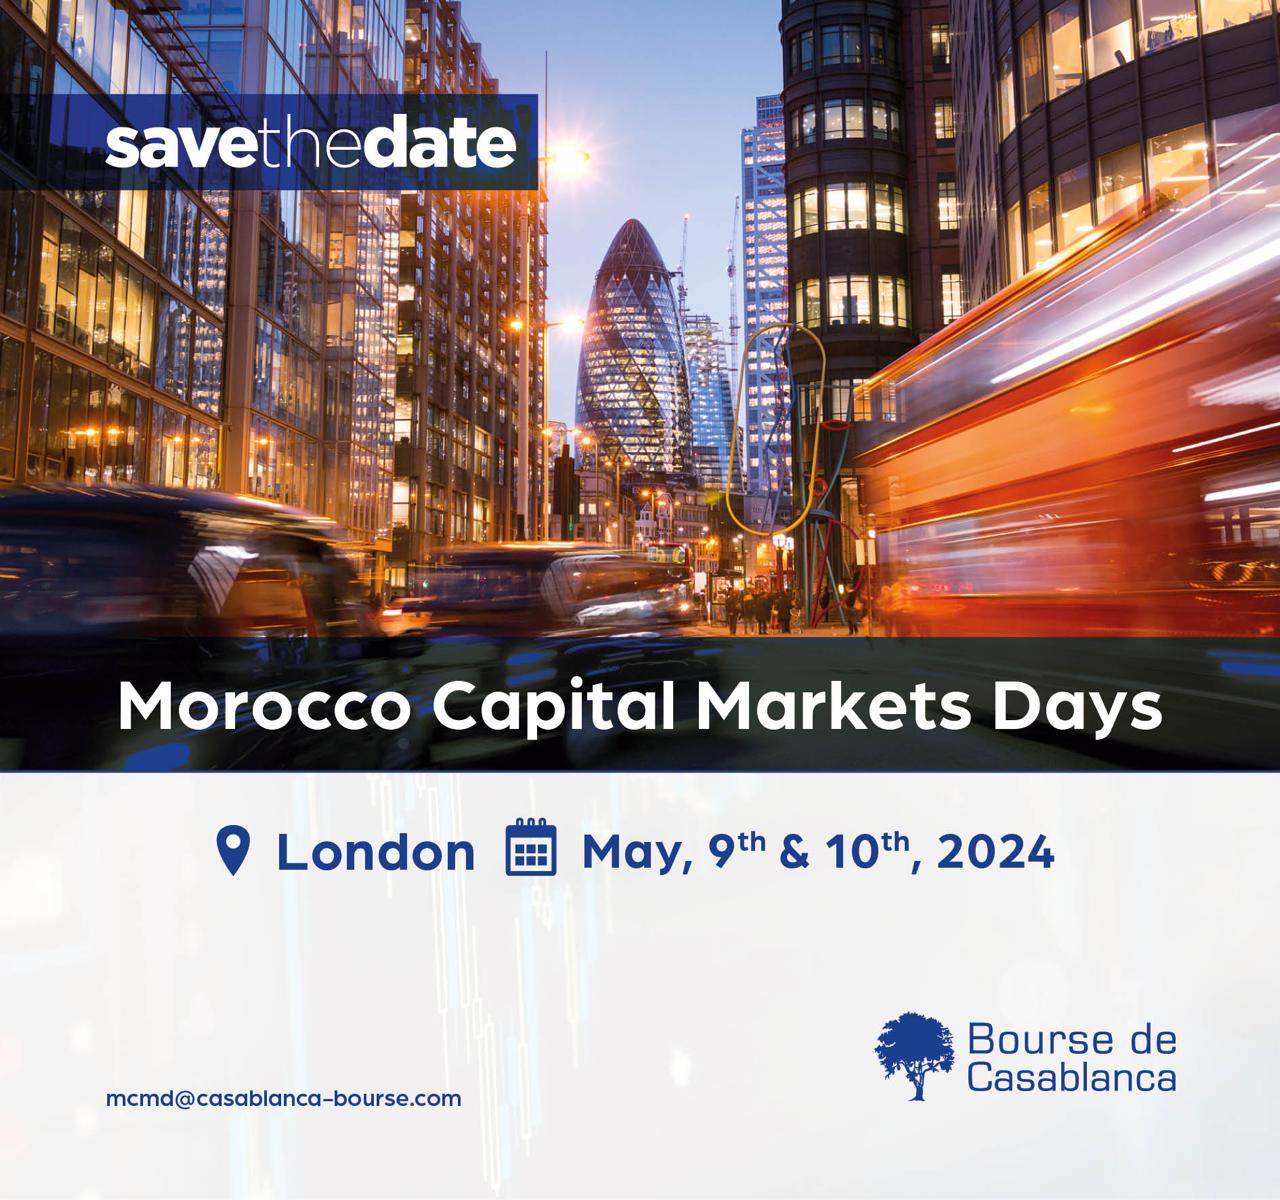 Major mobilization of the Casablanca Stock Exchange and its partners in London to attract new investors